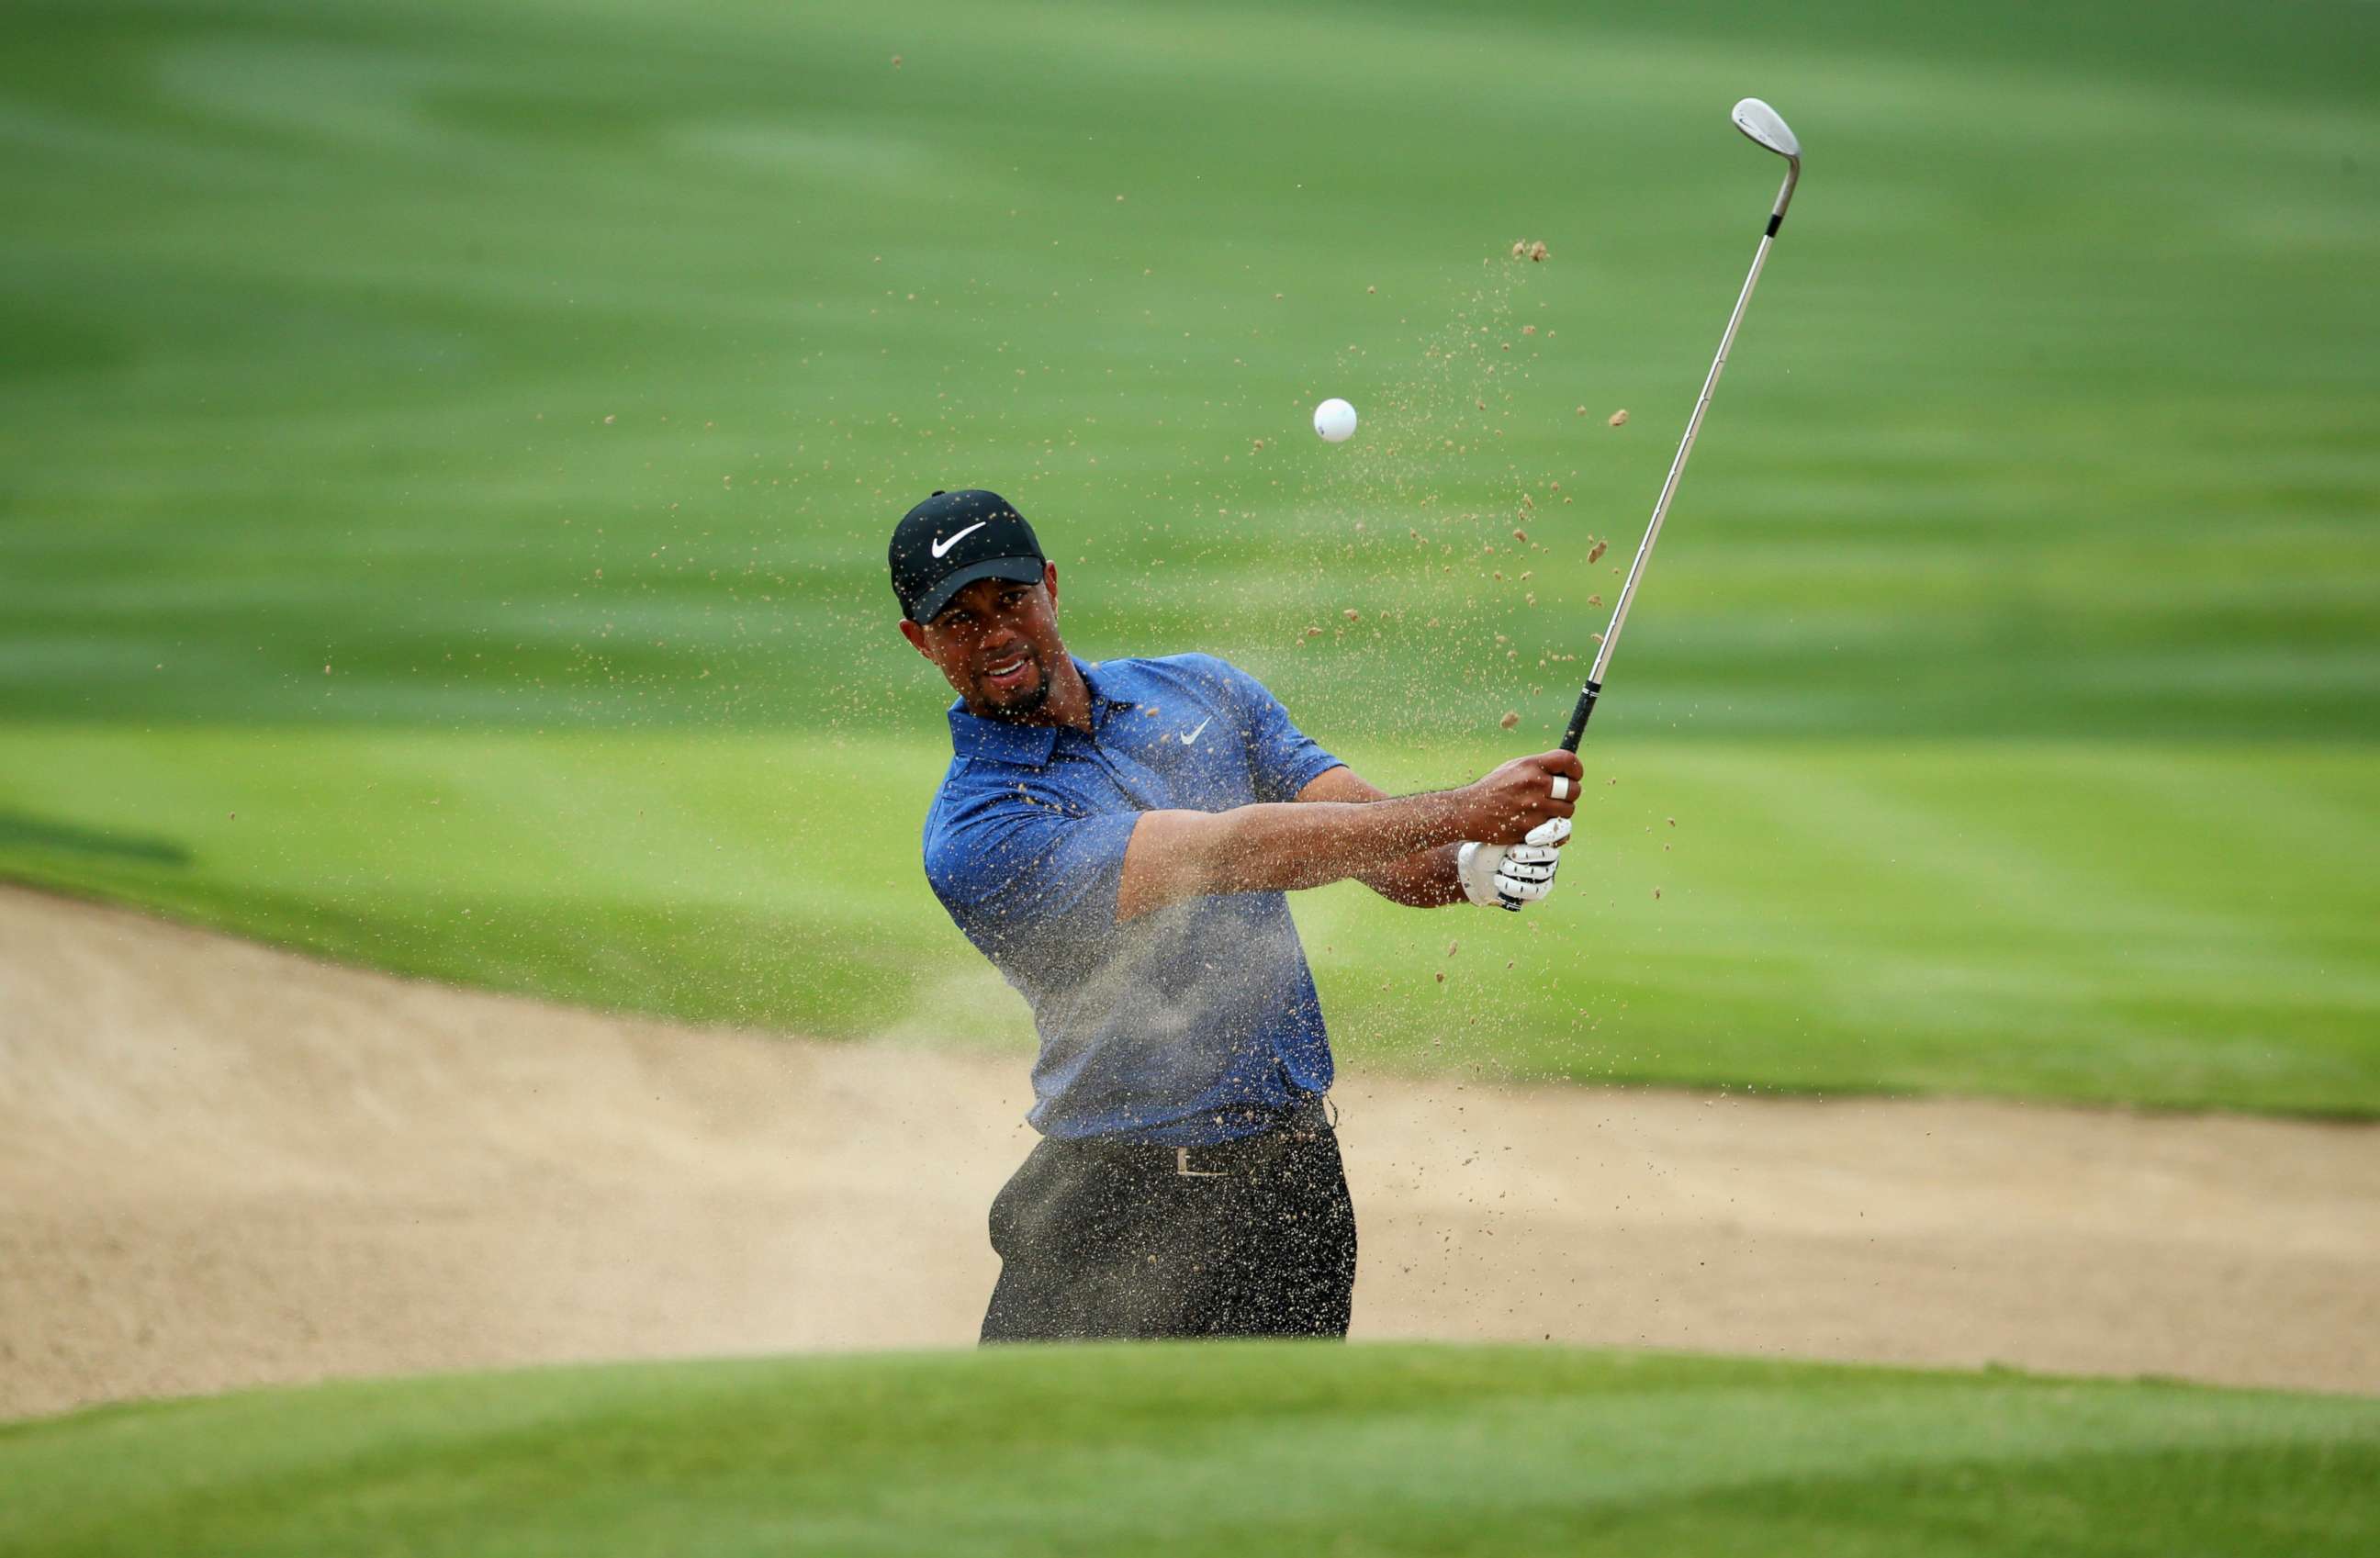 PHOTO: Tiger Woods plays from a bunker on the 6th hole during the first round of the Omega Dubai Desert Classic at Emirates Golf Club in this Feb. 2, 2017 file photo in Dubai.